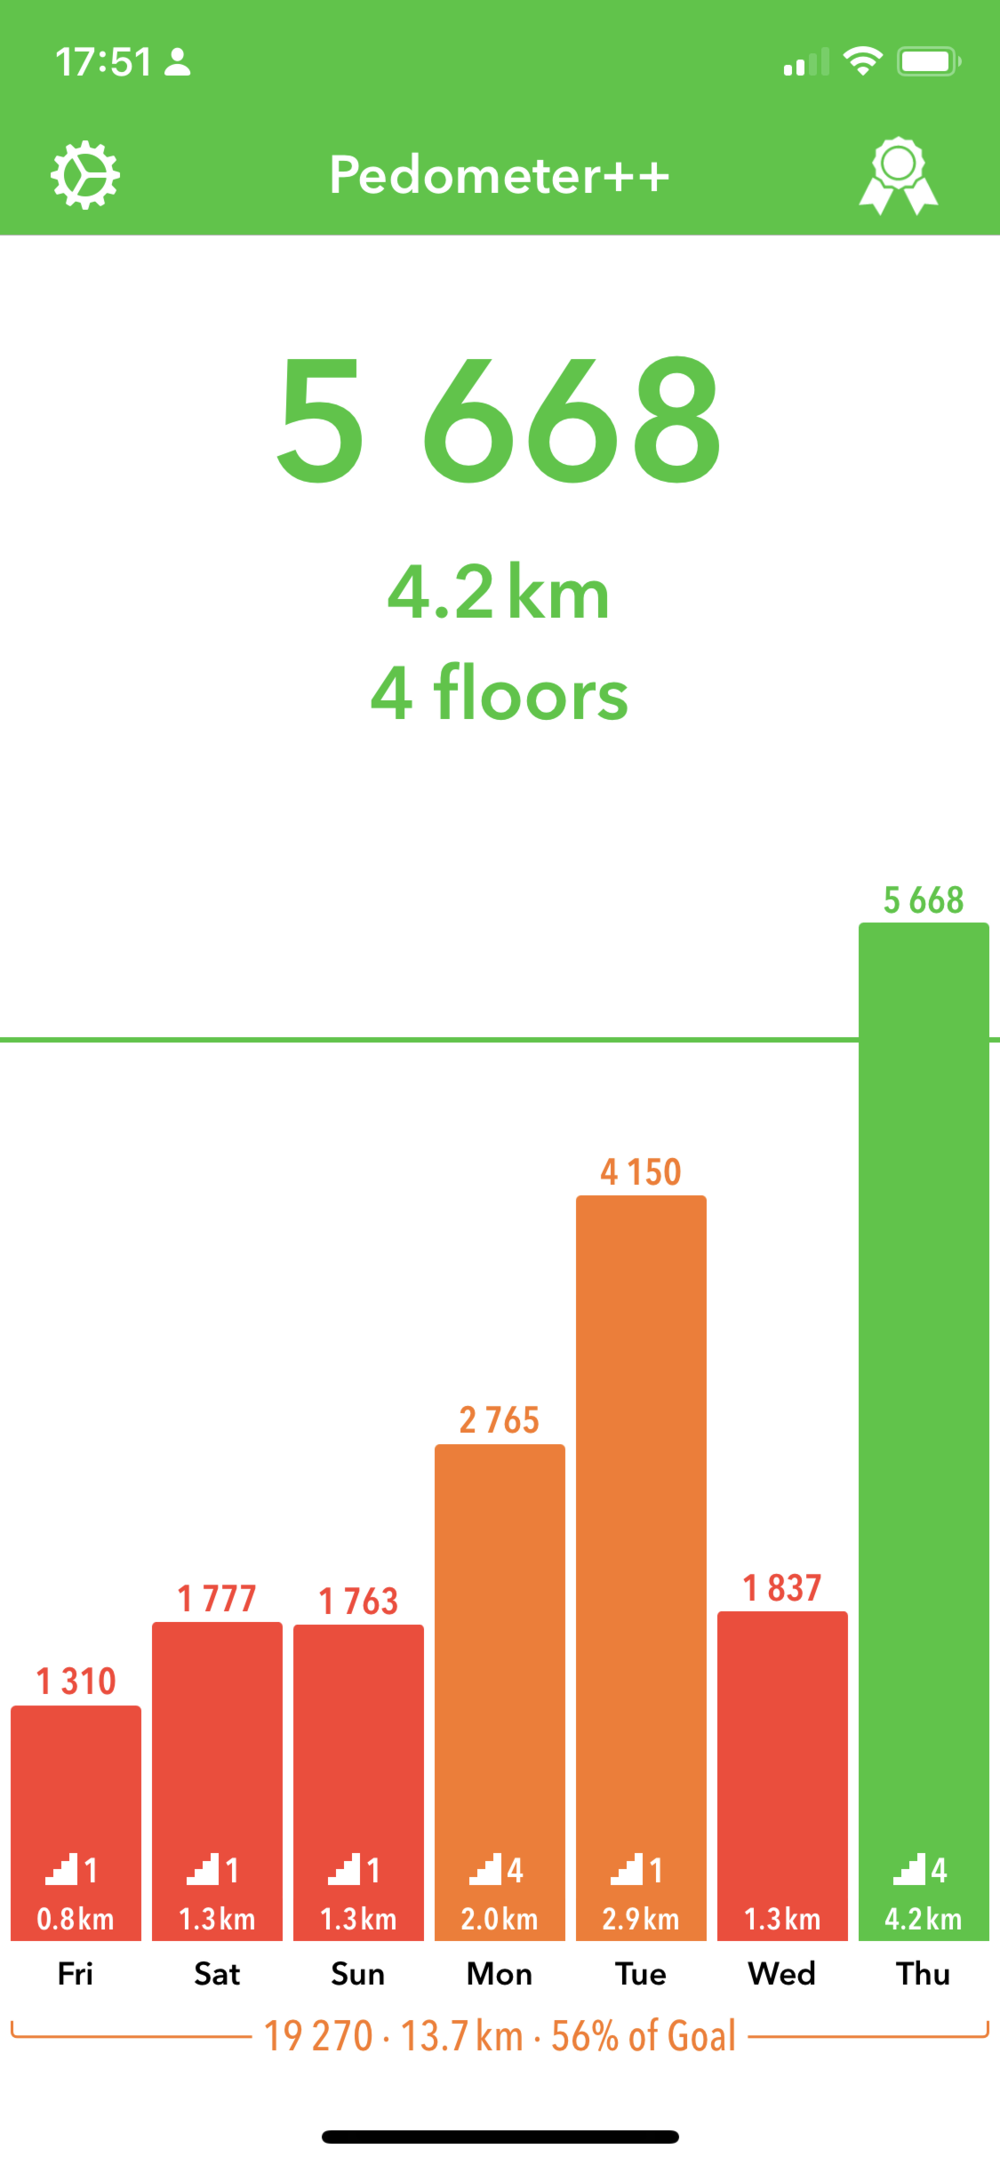 My daily stepcount is increasing per this graph.